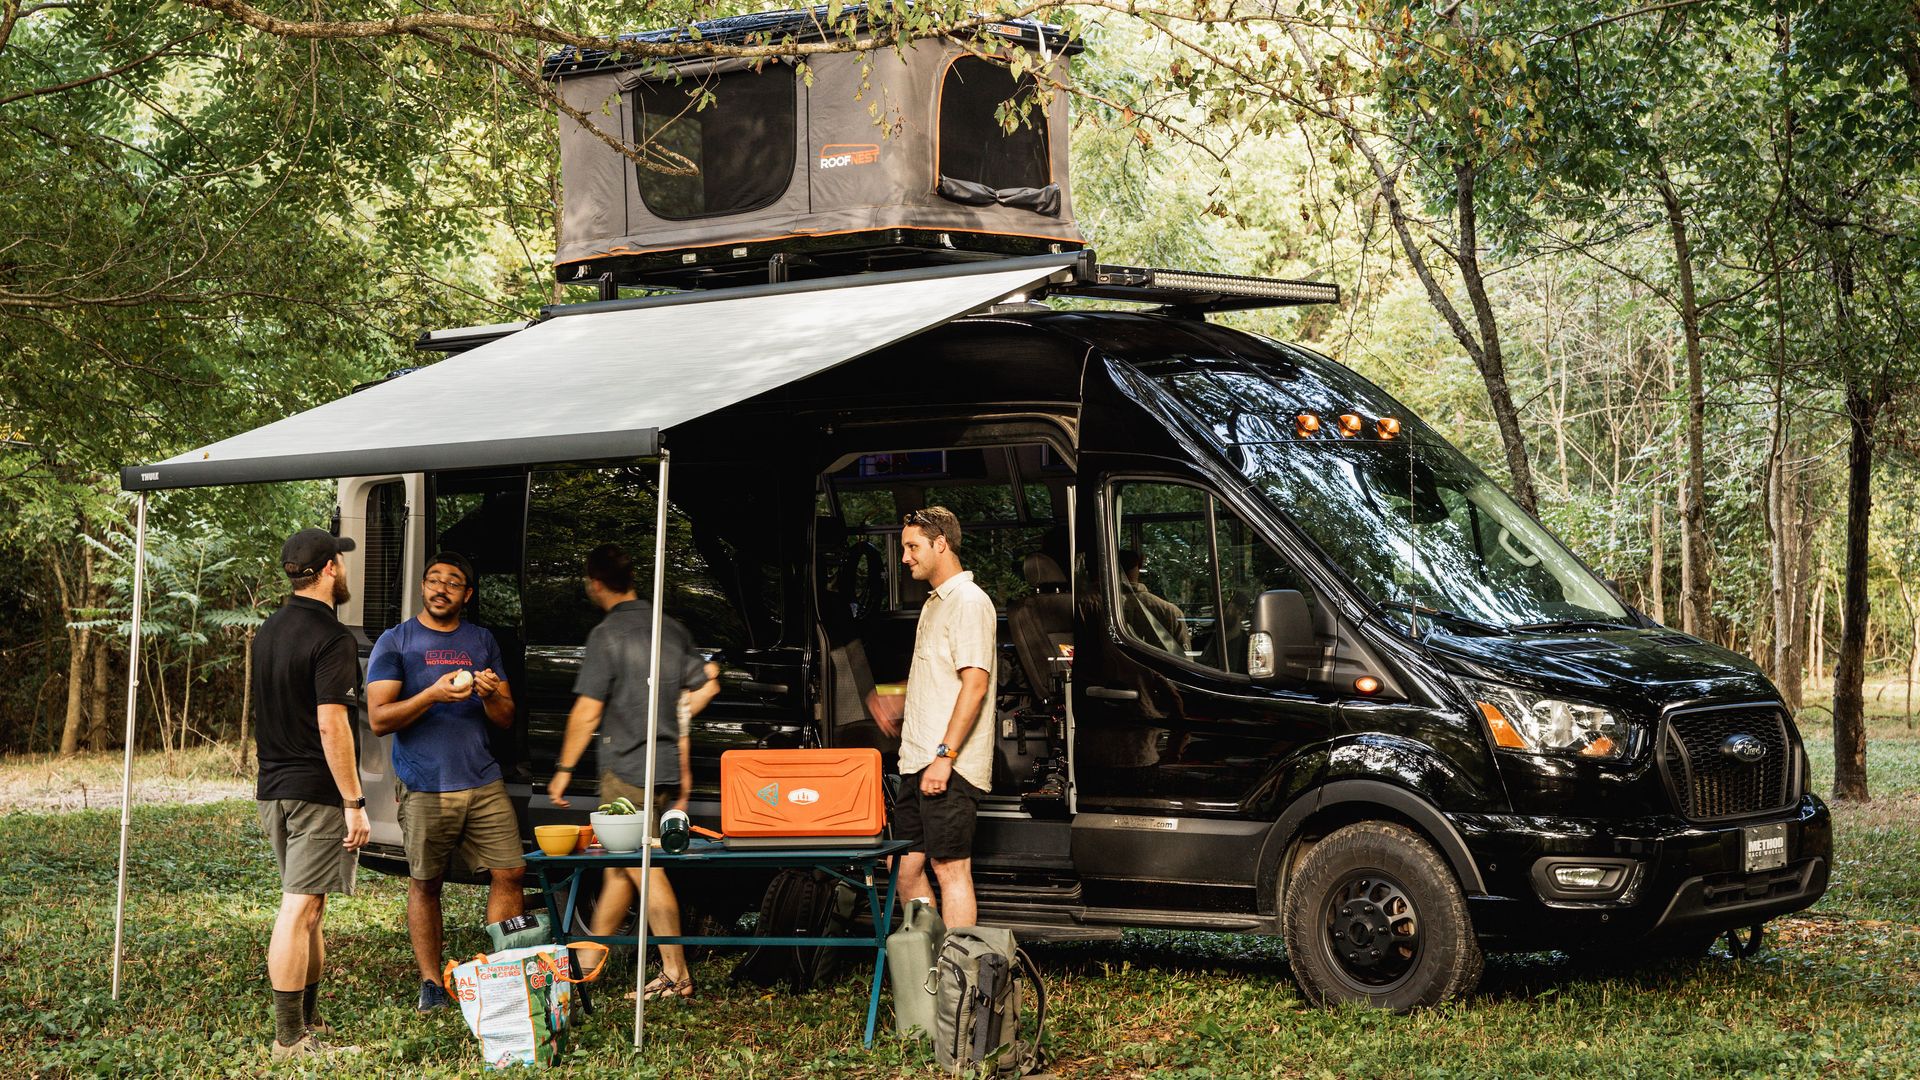 Three men stand around a camper at a campsite in the woods.